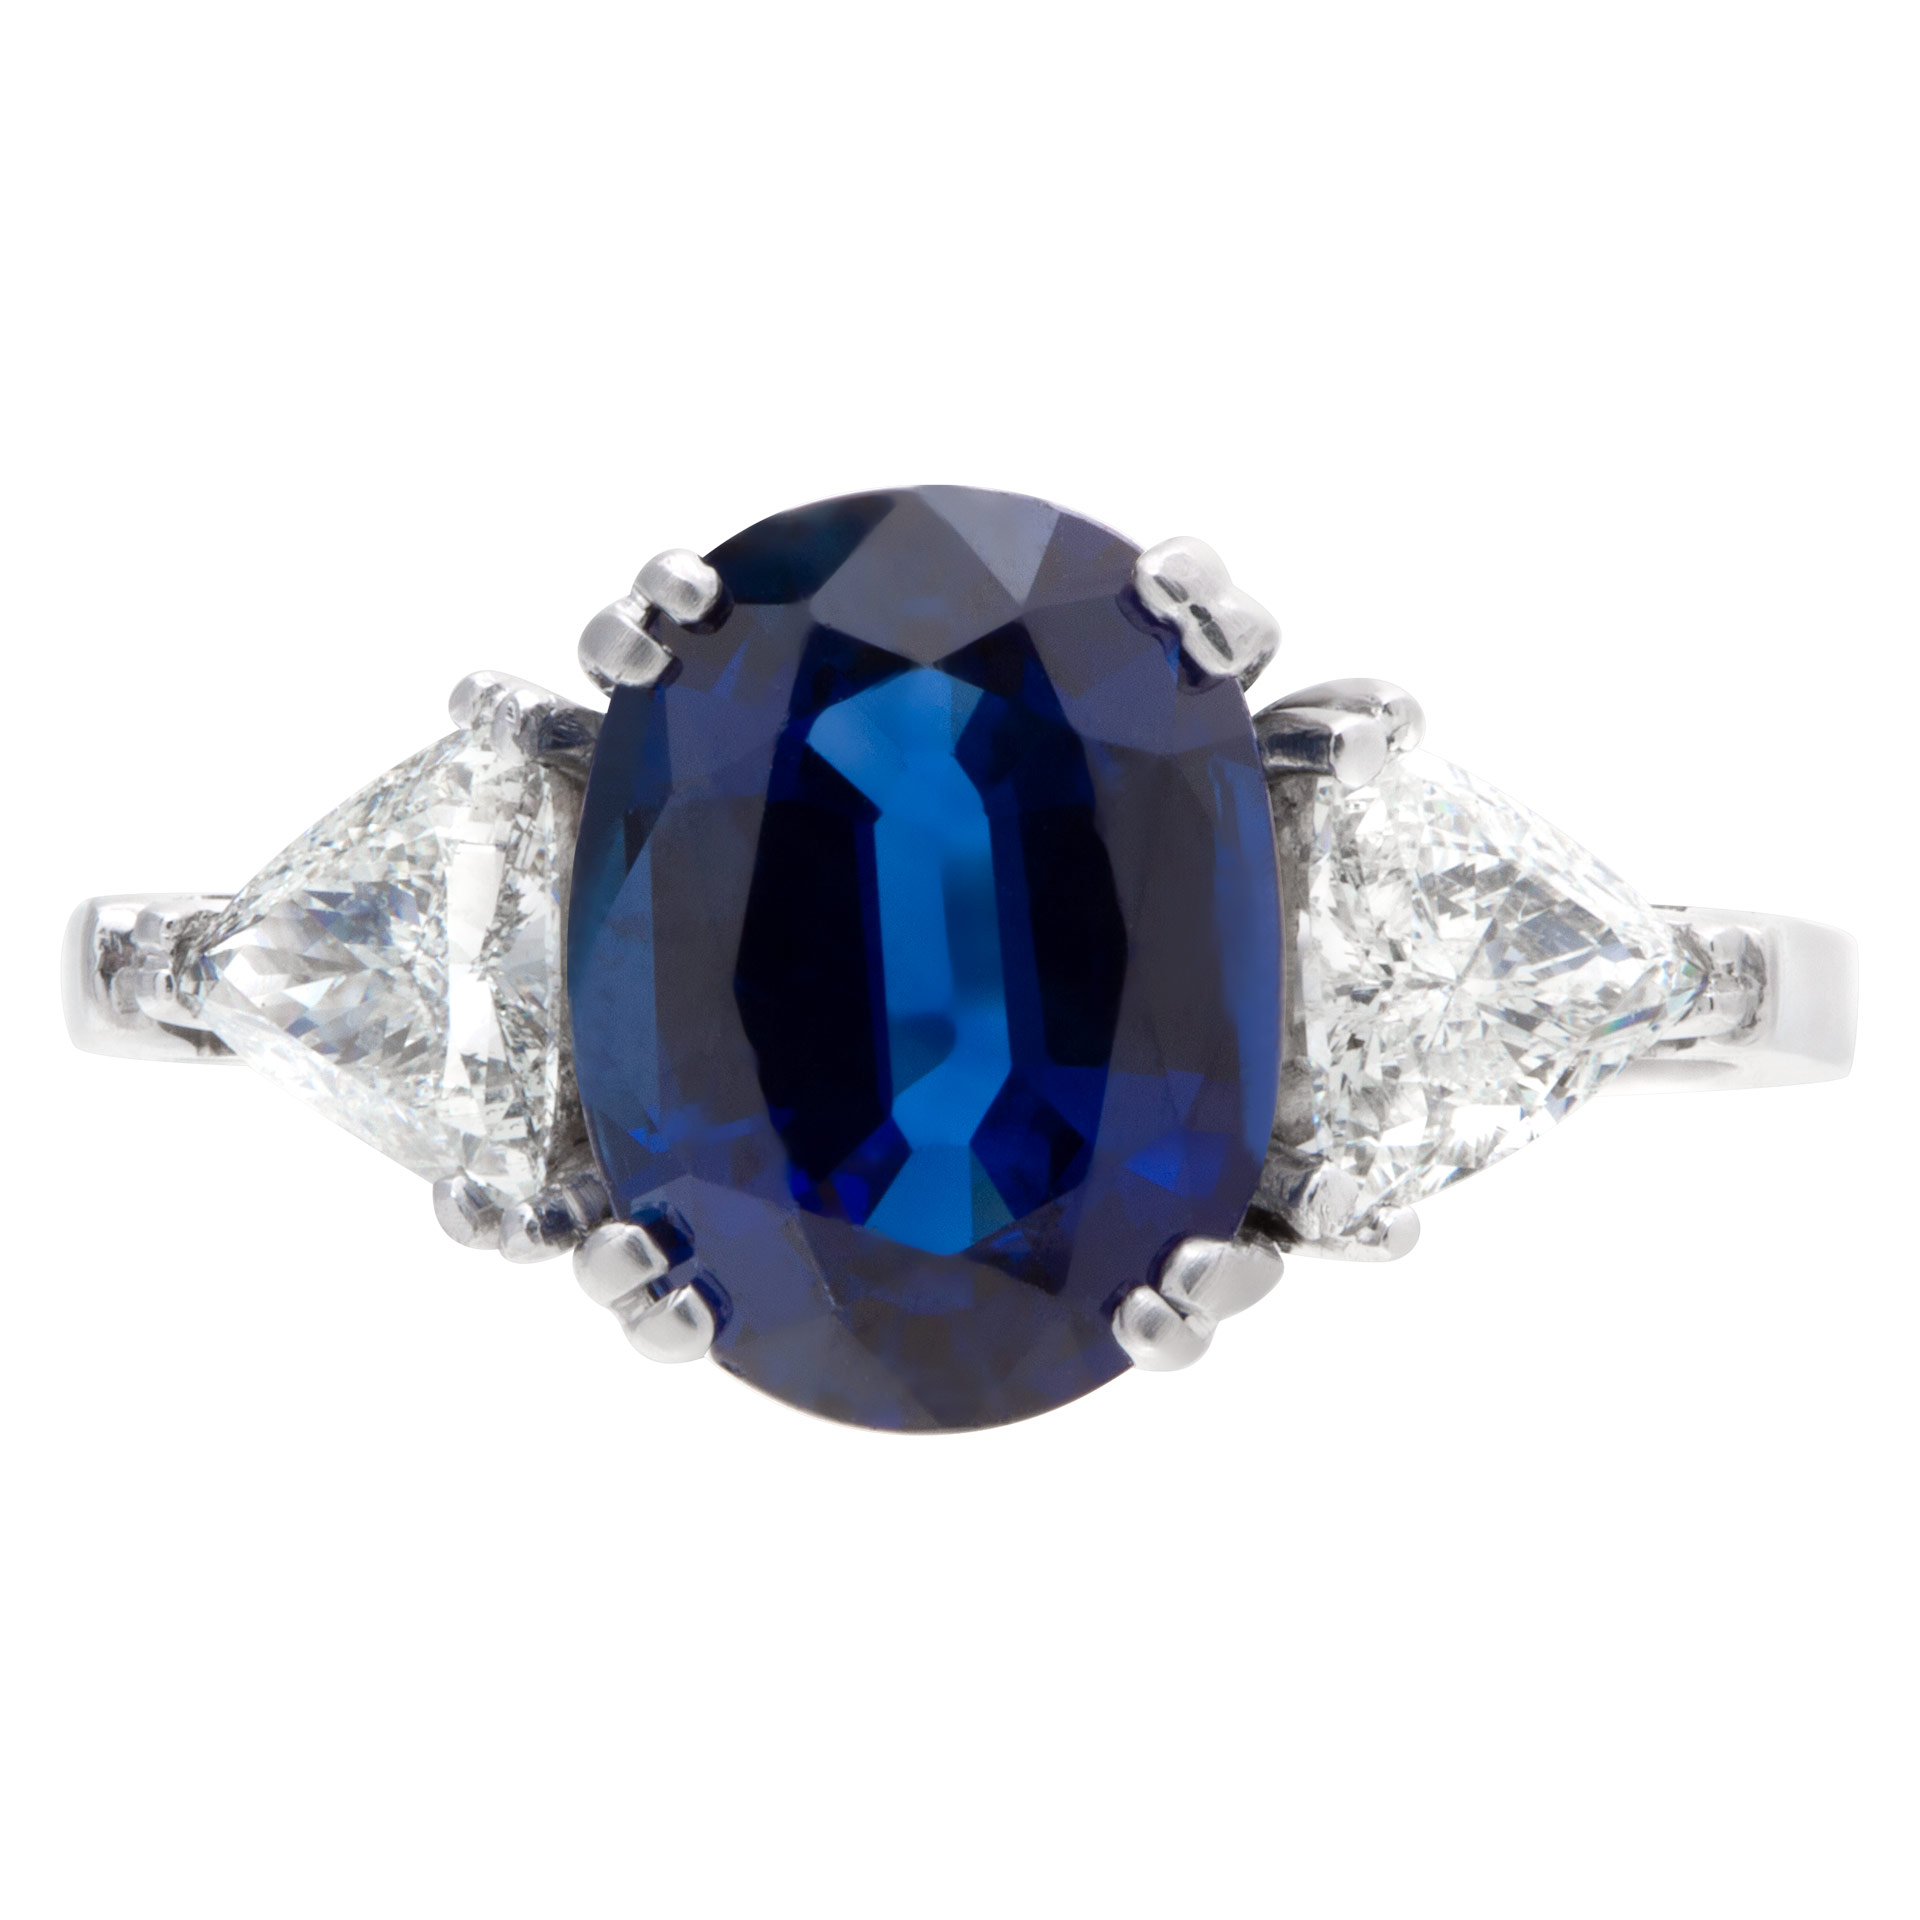 AGL certified natural sapphire 3.56 carat in 18k white gold